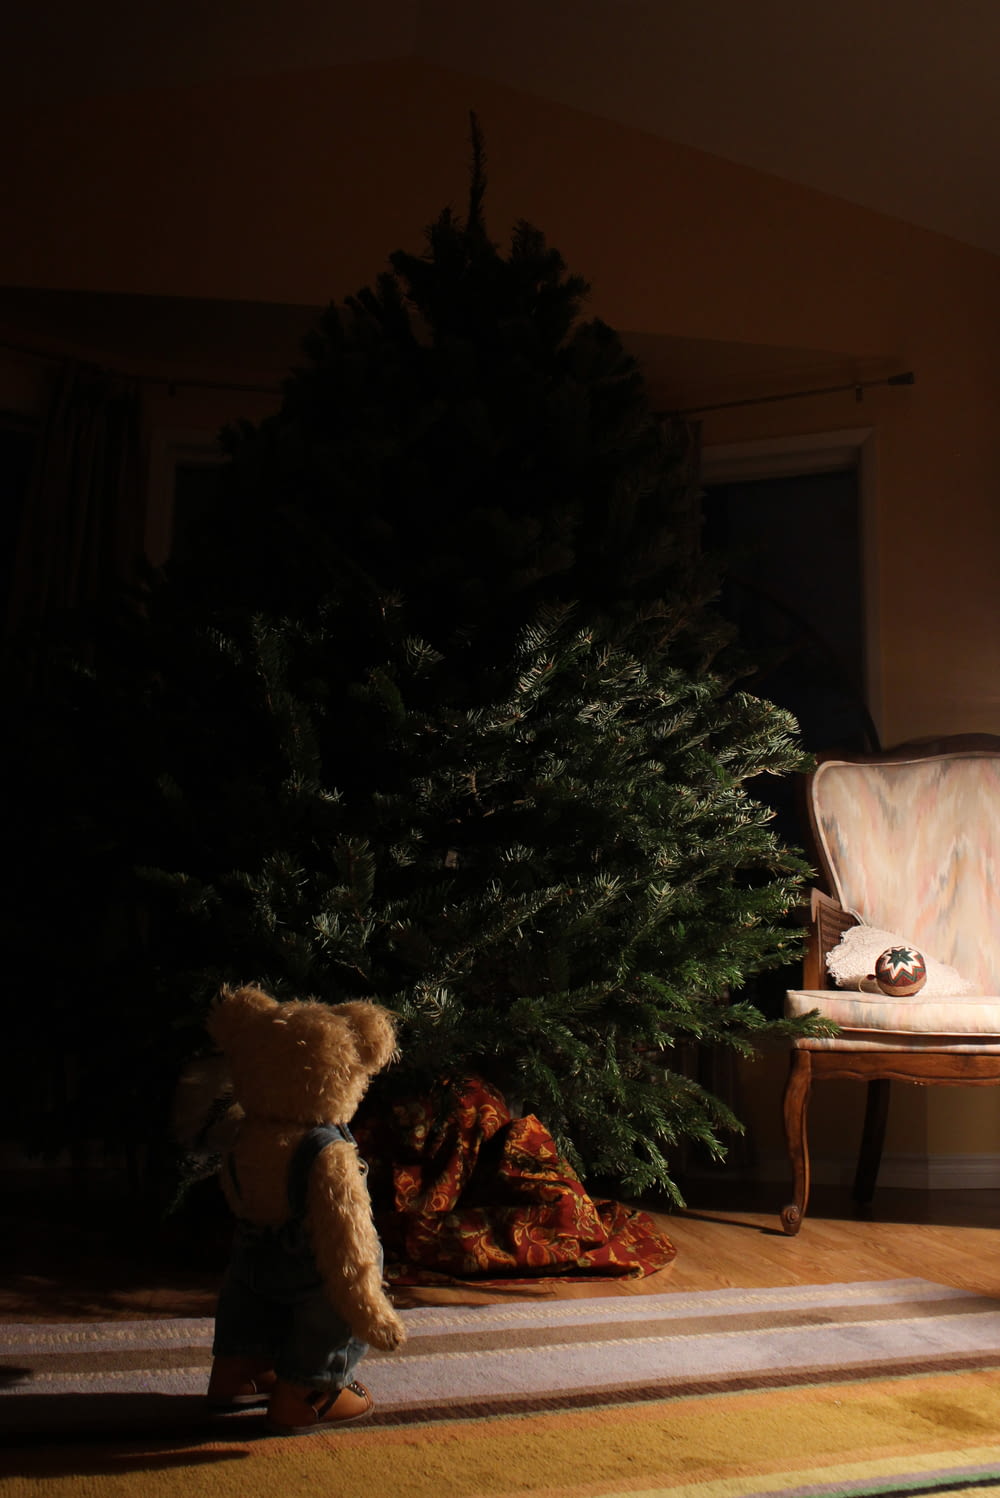 brown bear plush toy in front of green holiday tree